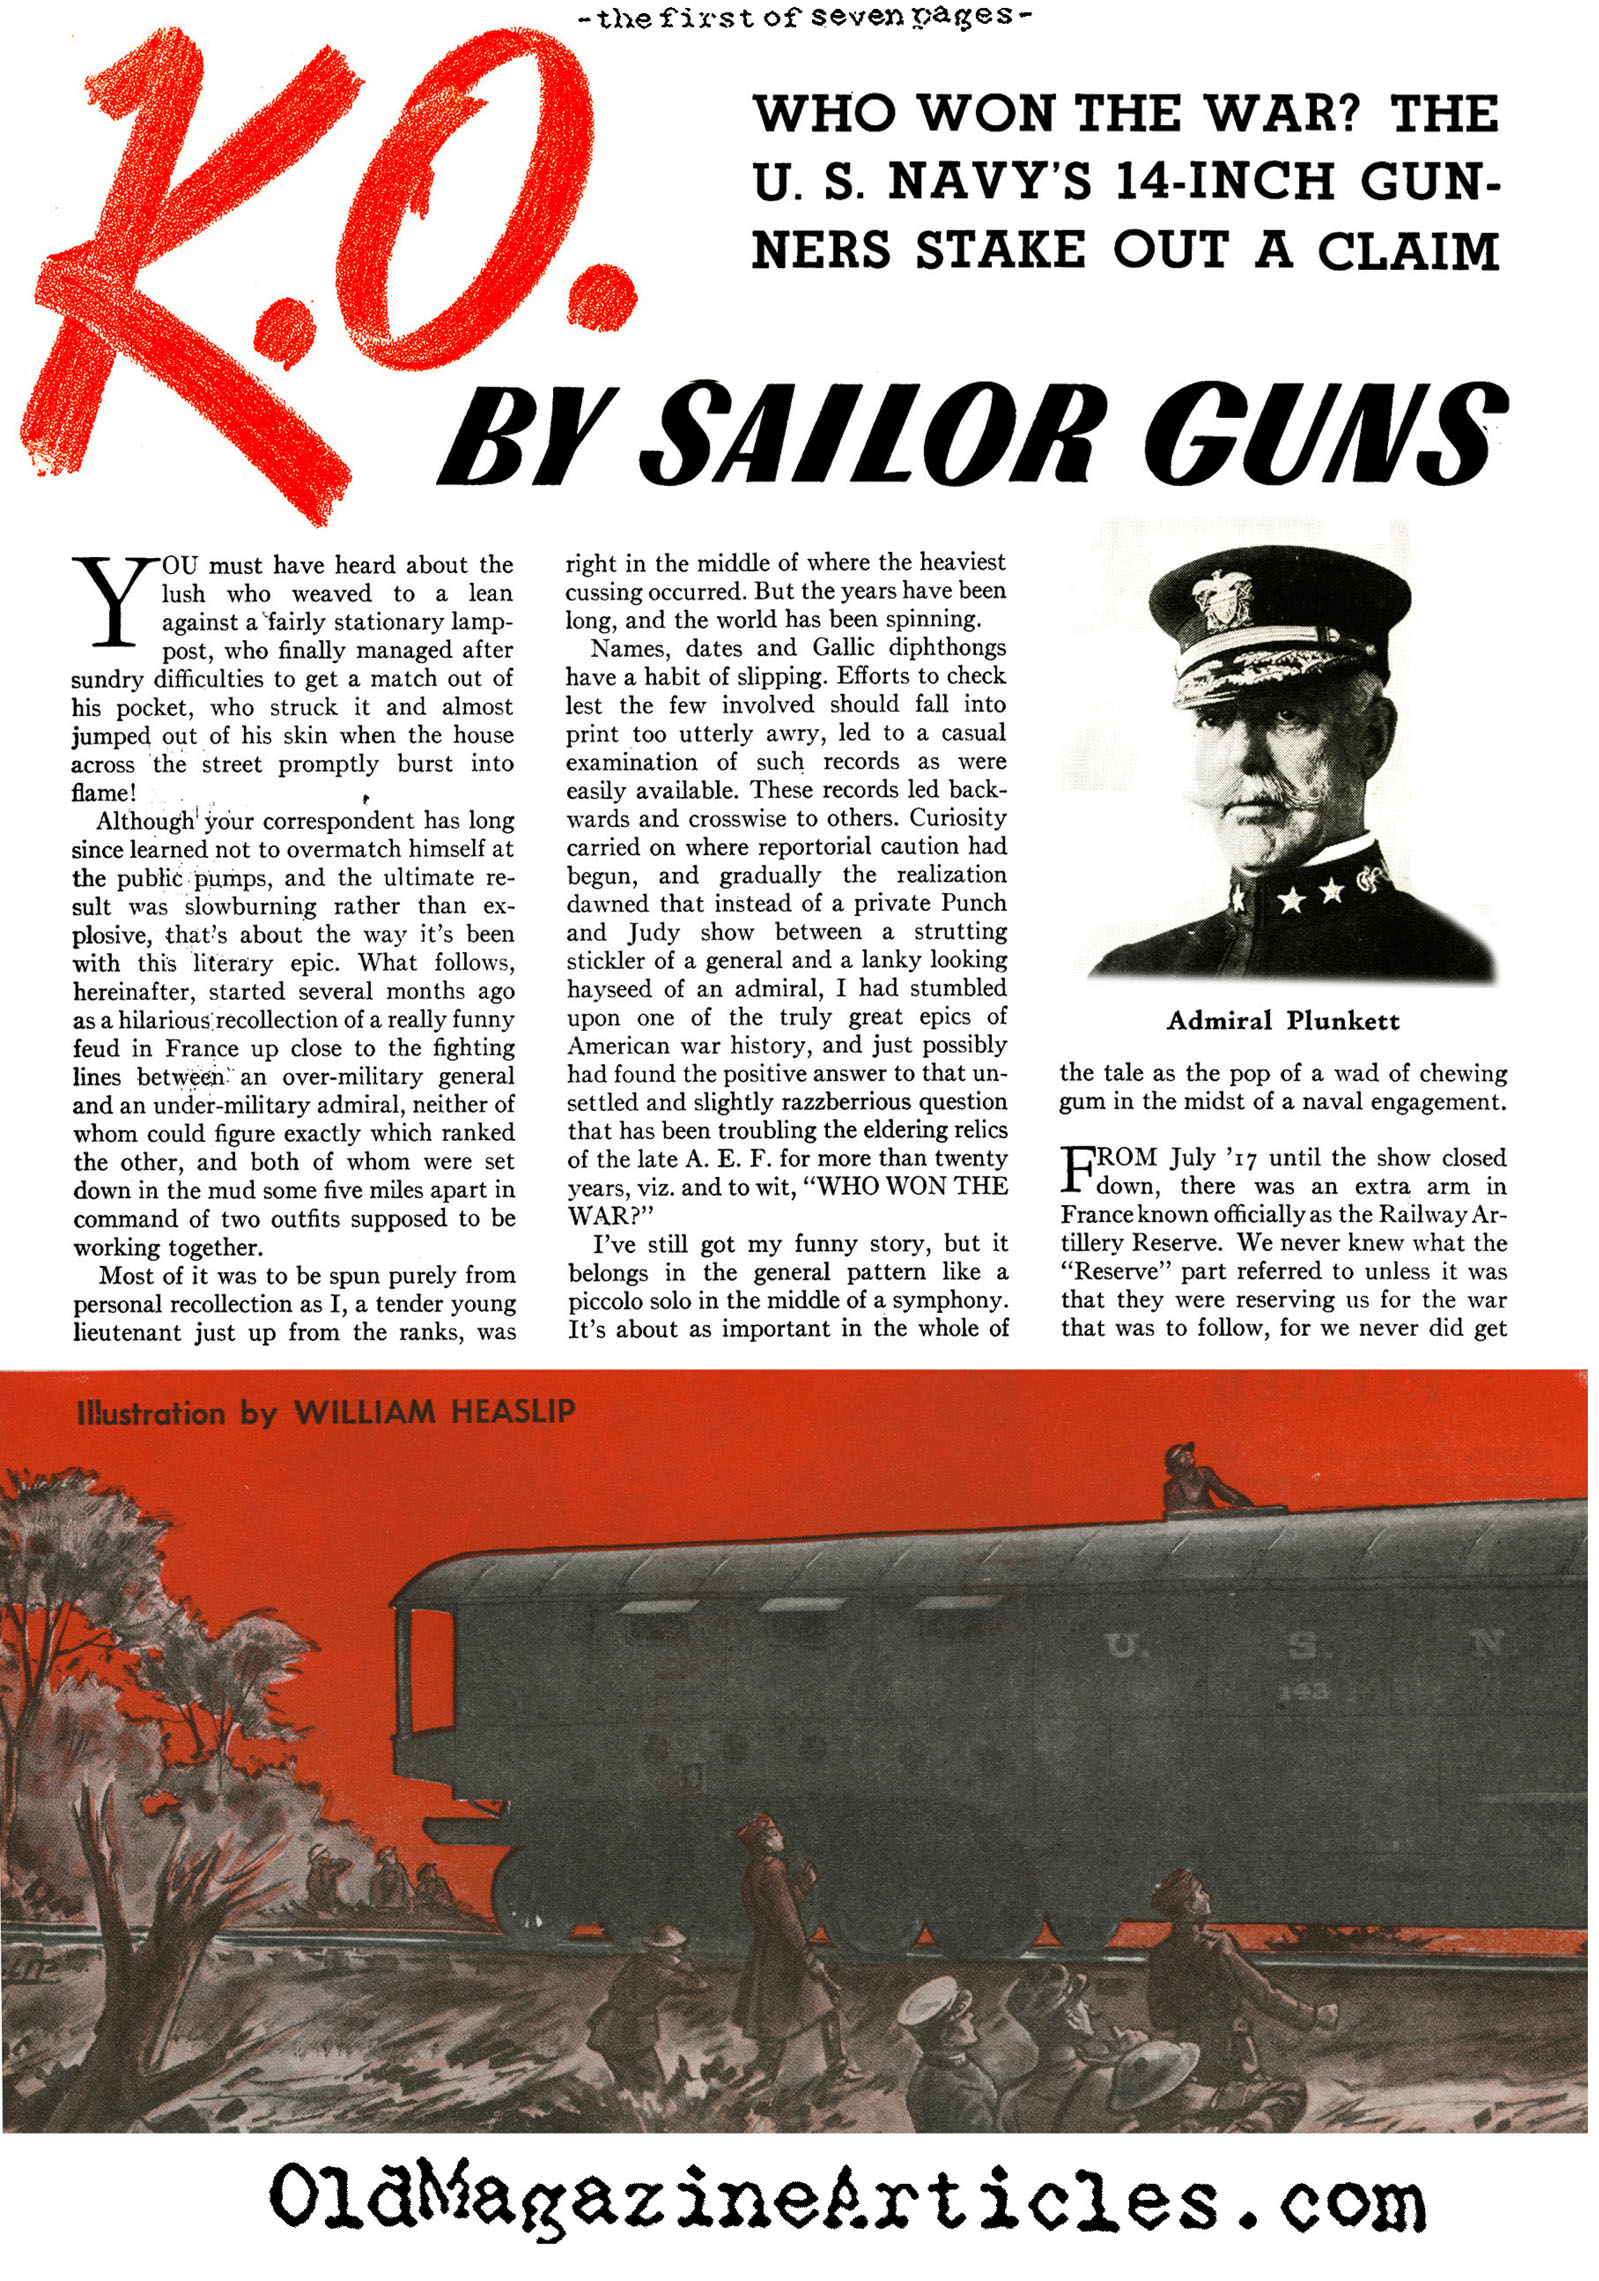 With the Sailor Guns in France (The American Legion Magazine, 1940)